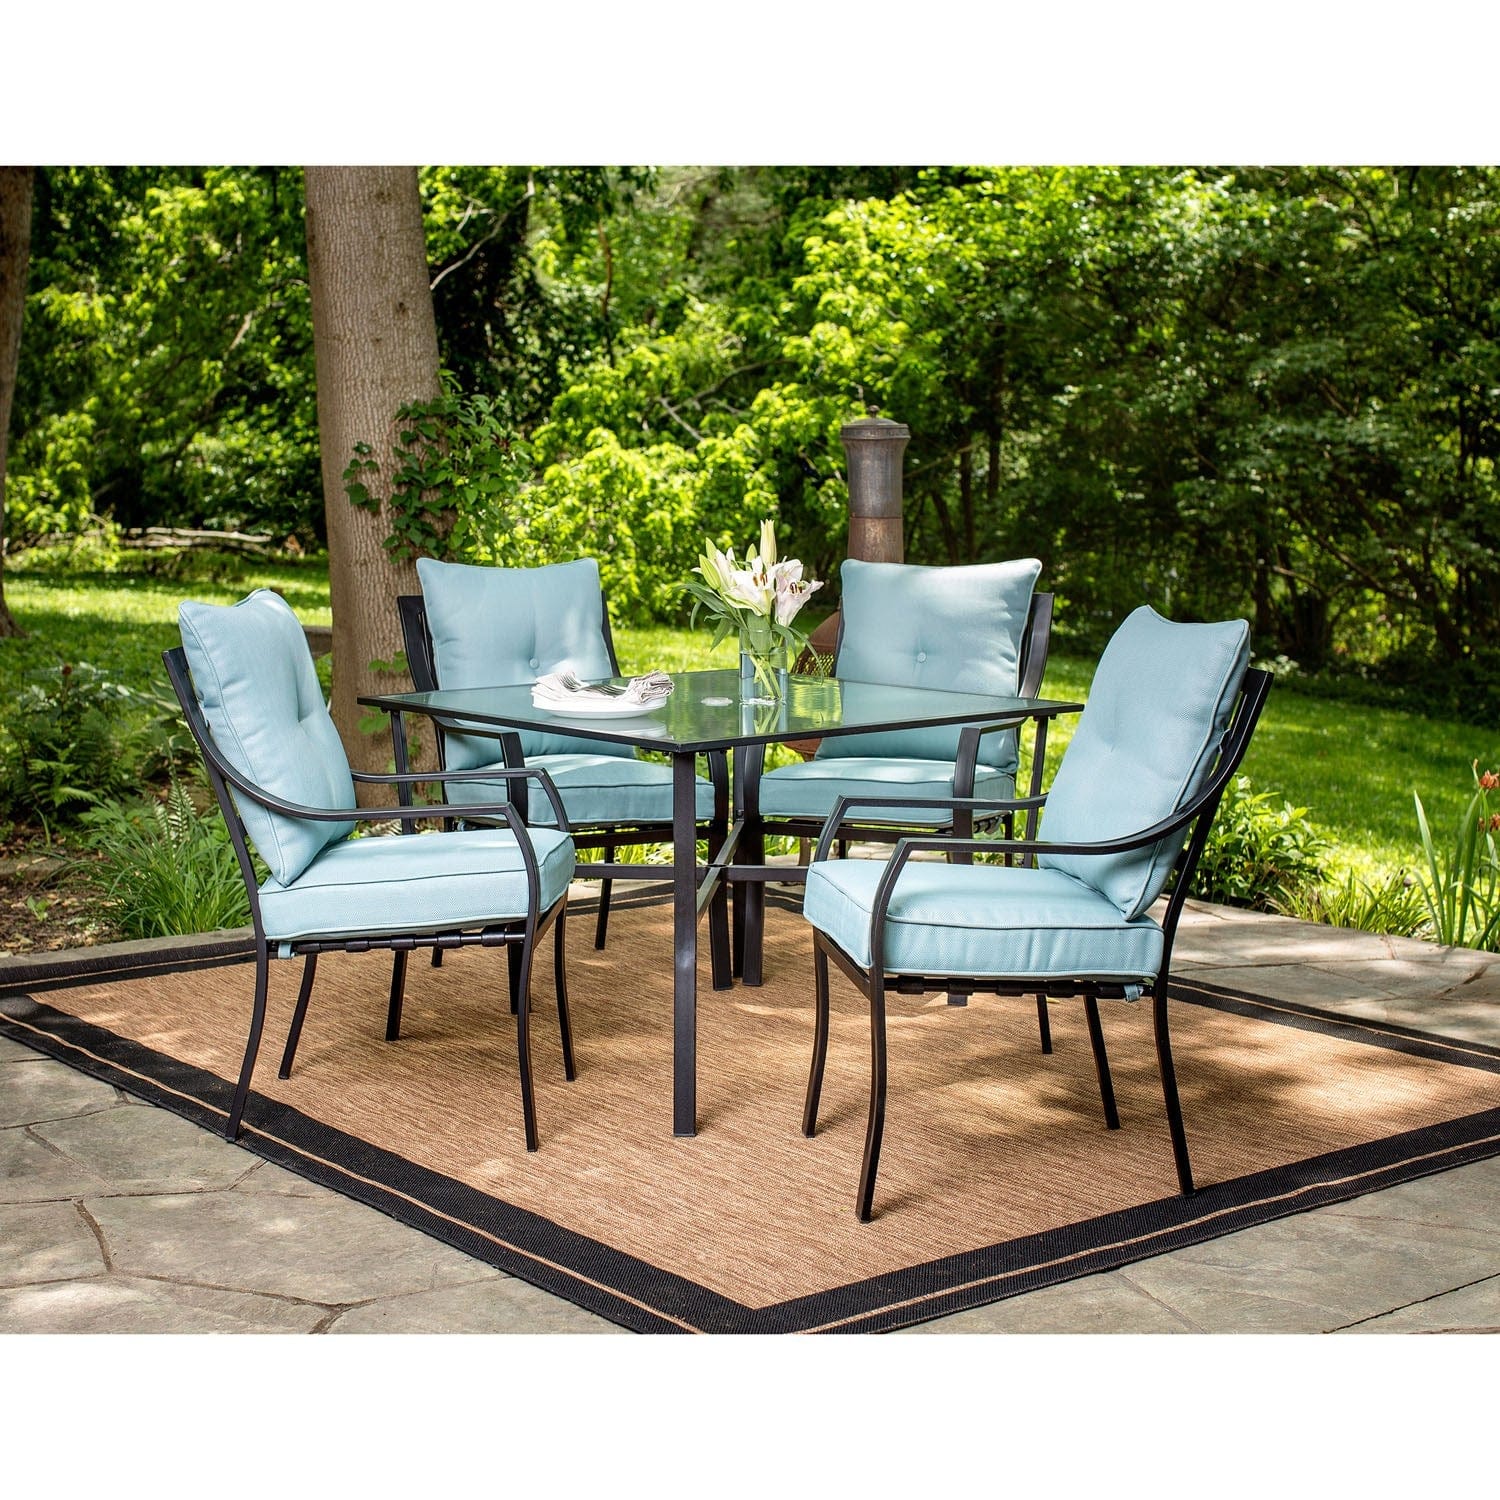 Hanover Outdoor Dining Set Hanover Lavallette 5-Piece Dining Set in Ocean Blue - LAVDN5PC-BLU